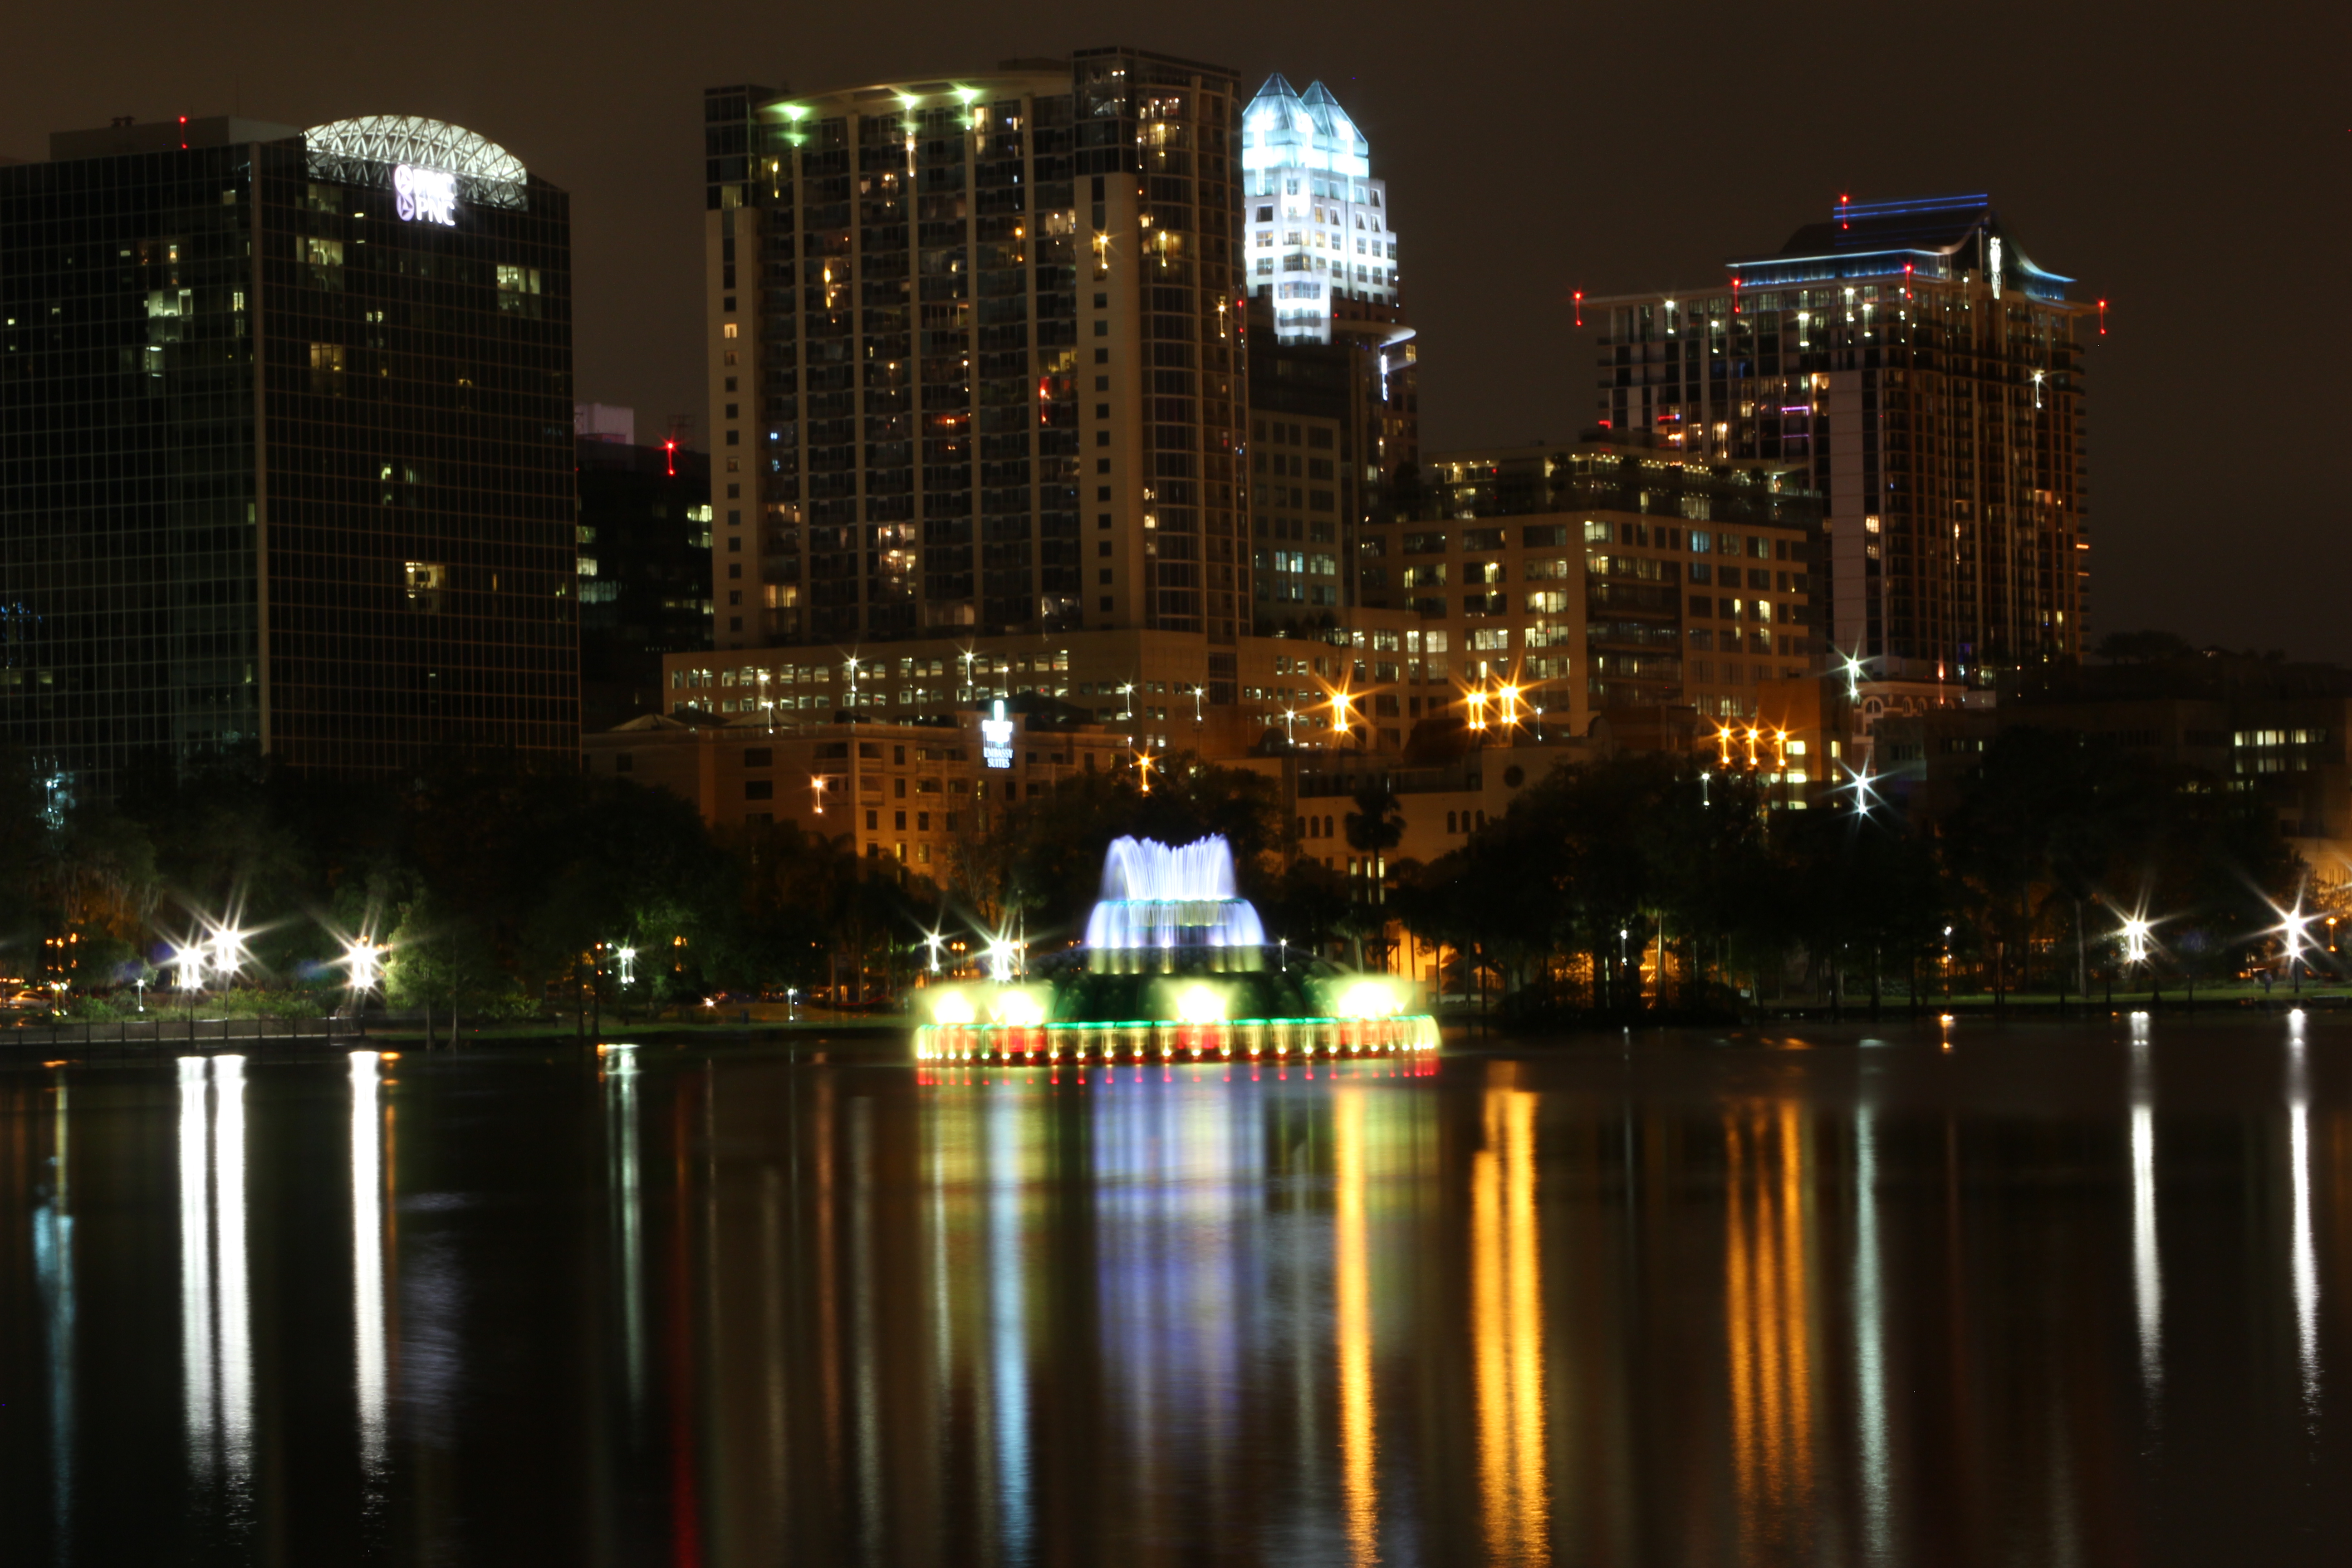 Photograph of the Lake Eola fountain with the Orlando skyline in the background, at night